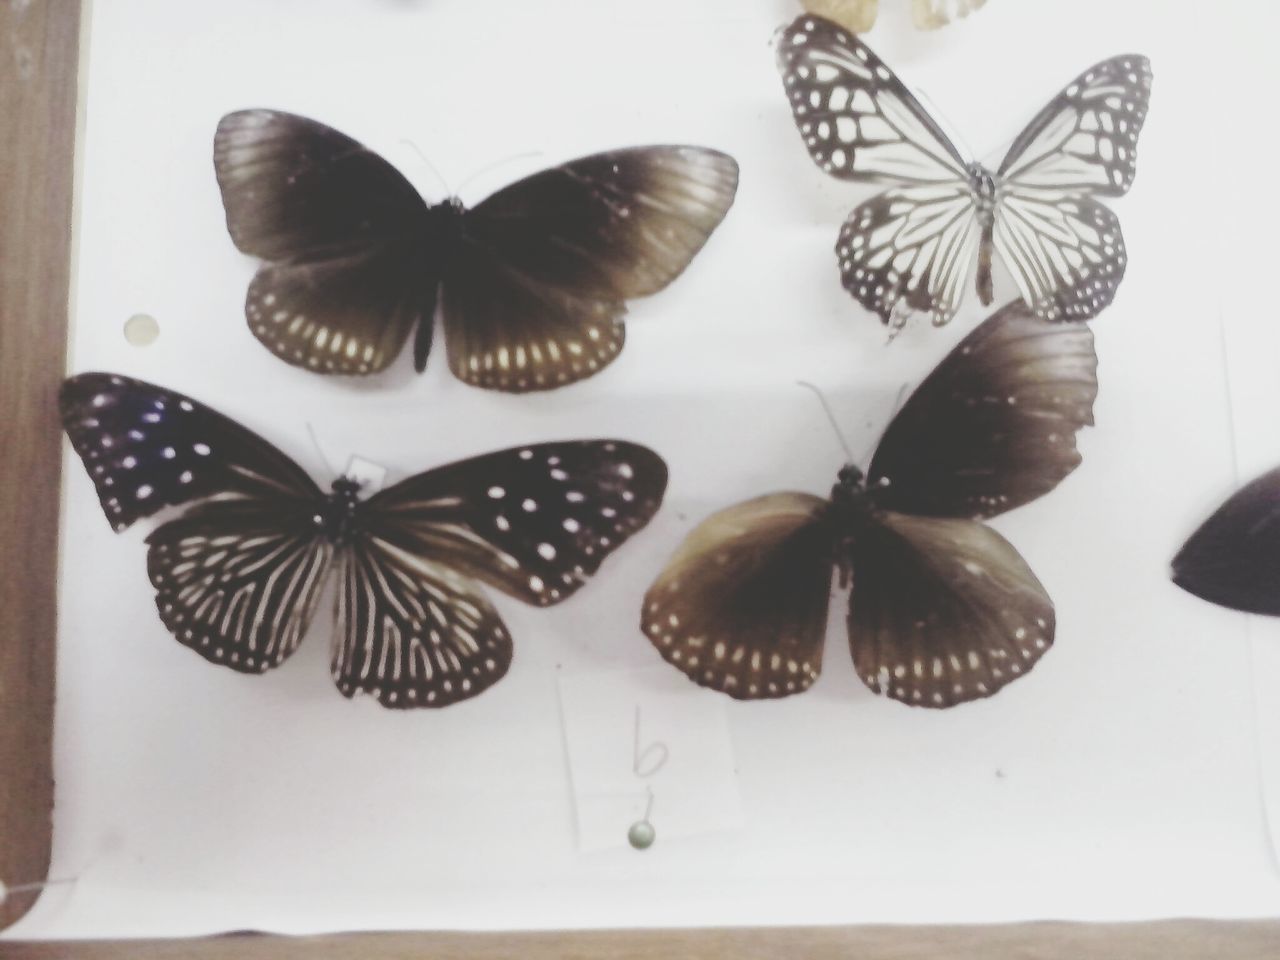 indoors, studio shot, white background, still life, close-up, high angle view, table, animal themes, insect, no people, wildlife, directly above, animals in the wild, cut out, butterfly - insect, copy space, nature, fragility, animal wing, variation